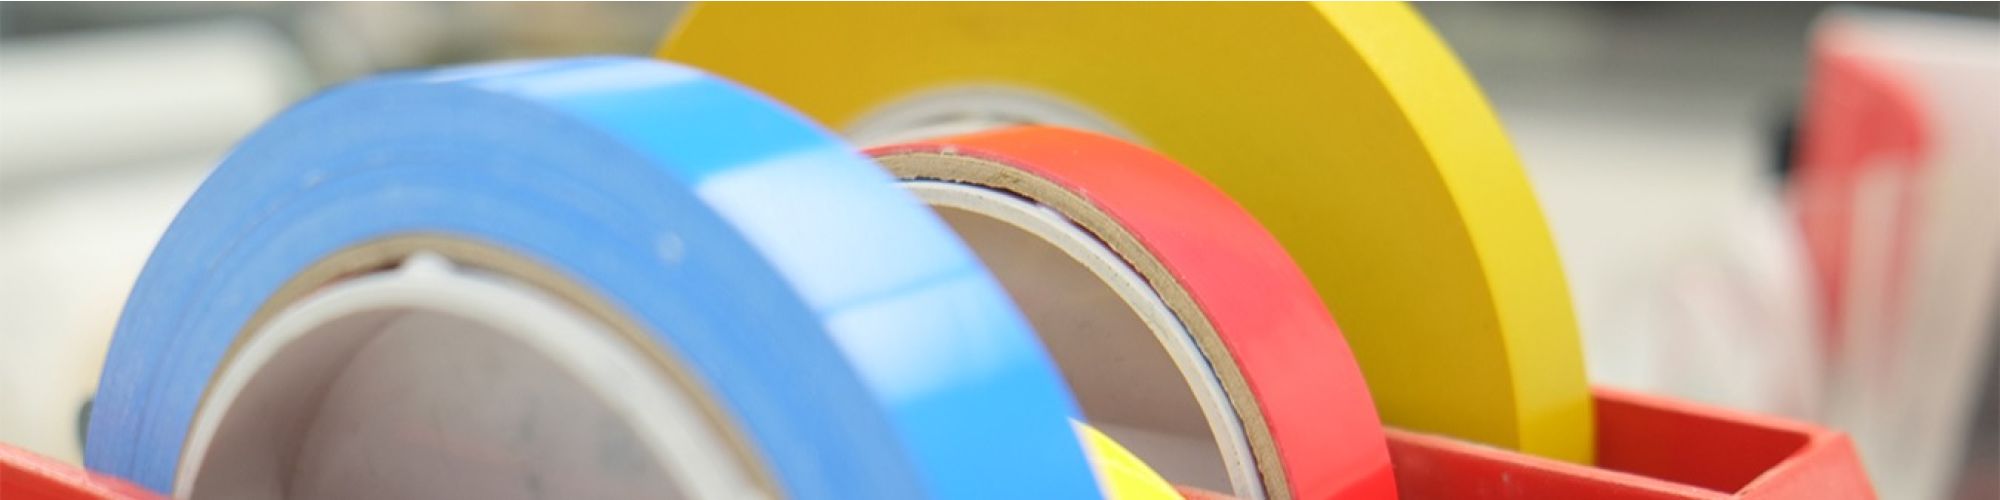 Adhesive tapes for packaging 